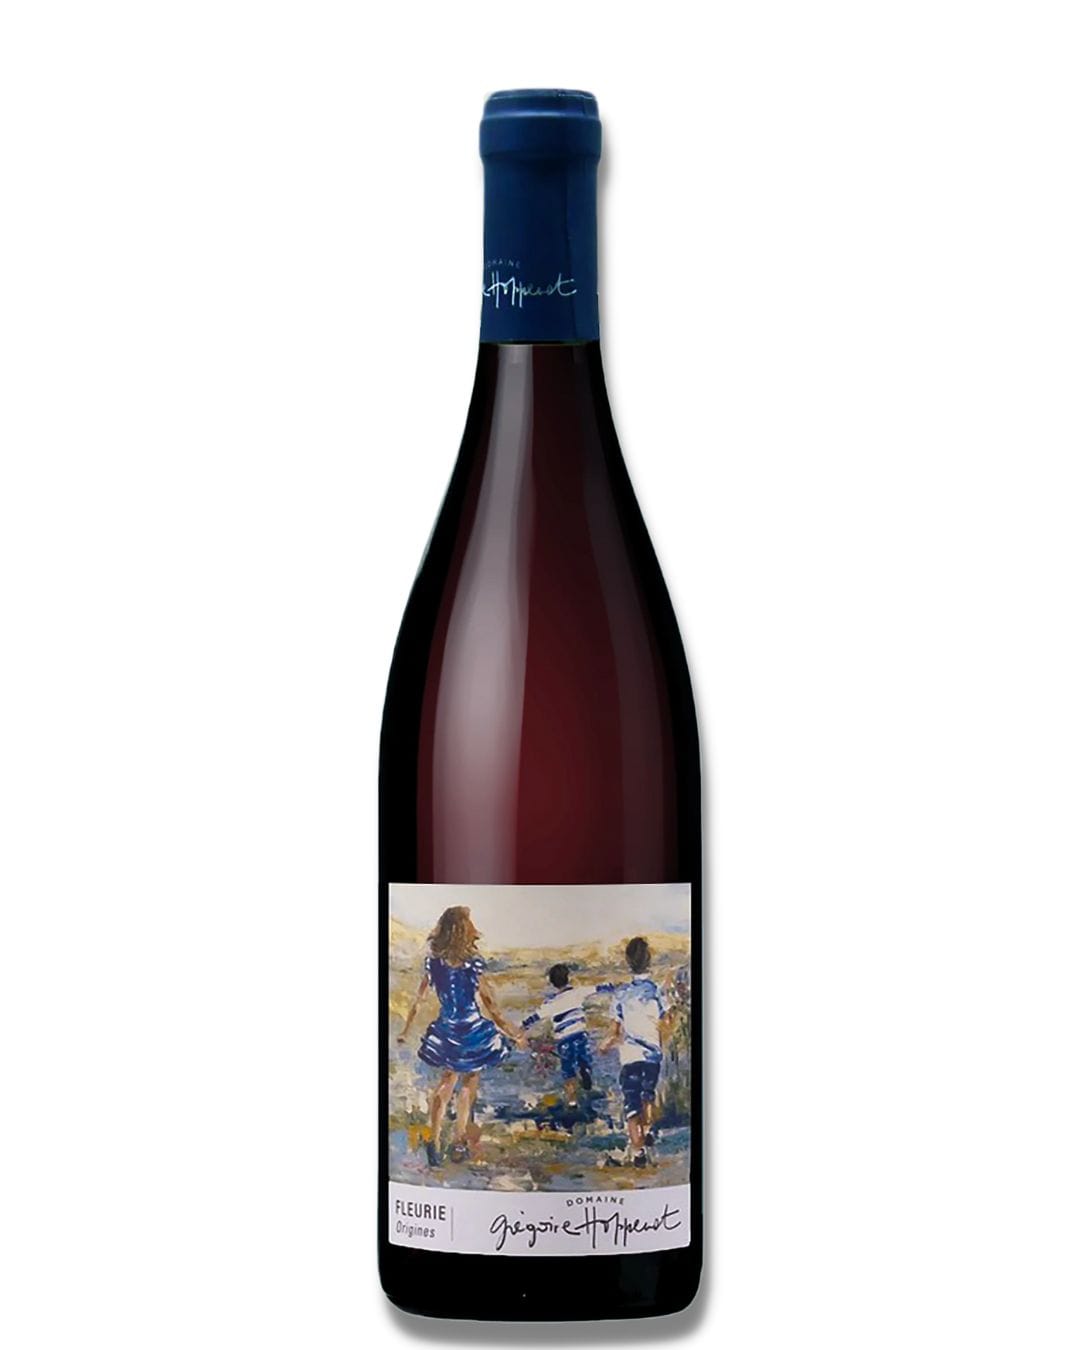 Shop Products Domaine Gregoire Hoppenot Domaine Gregoire Hoppenot Fleurie Origines 2021 online at PENTICTON artisanal French wine store in Hong Kong. Discover other French wines, promotions, workshops and featured offers at pentictonpacific.com 